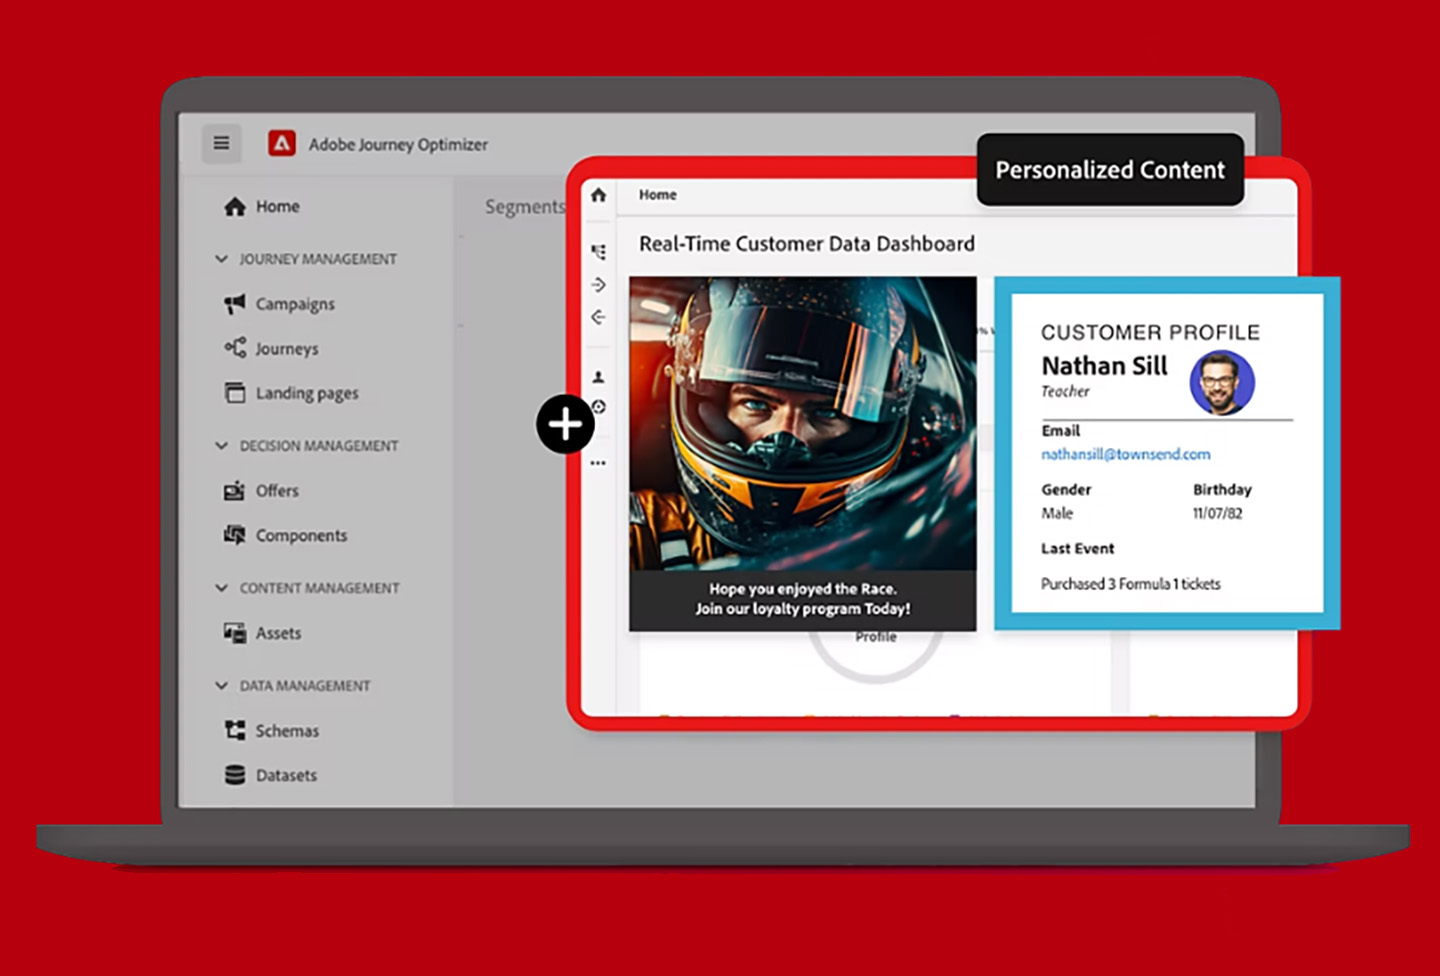 Adobe Journey Optimizer vs. Adobe Campaign: Which One is Right for Your Business?